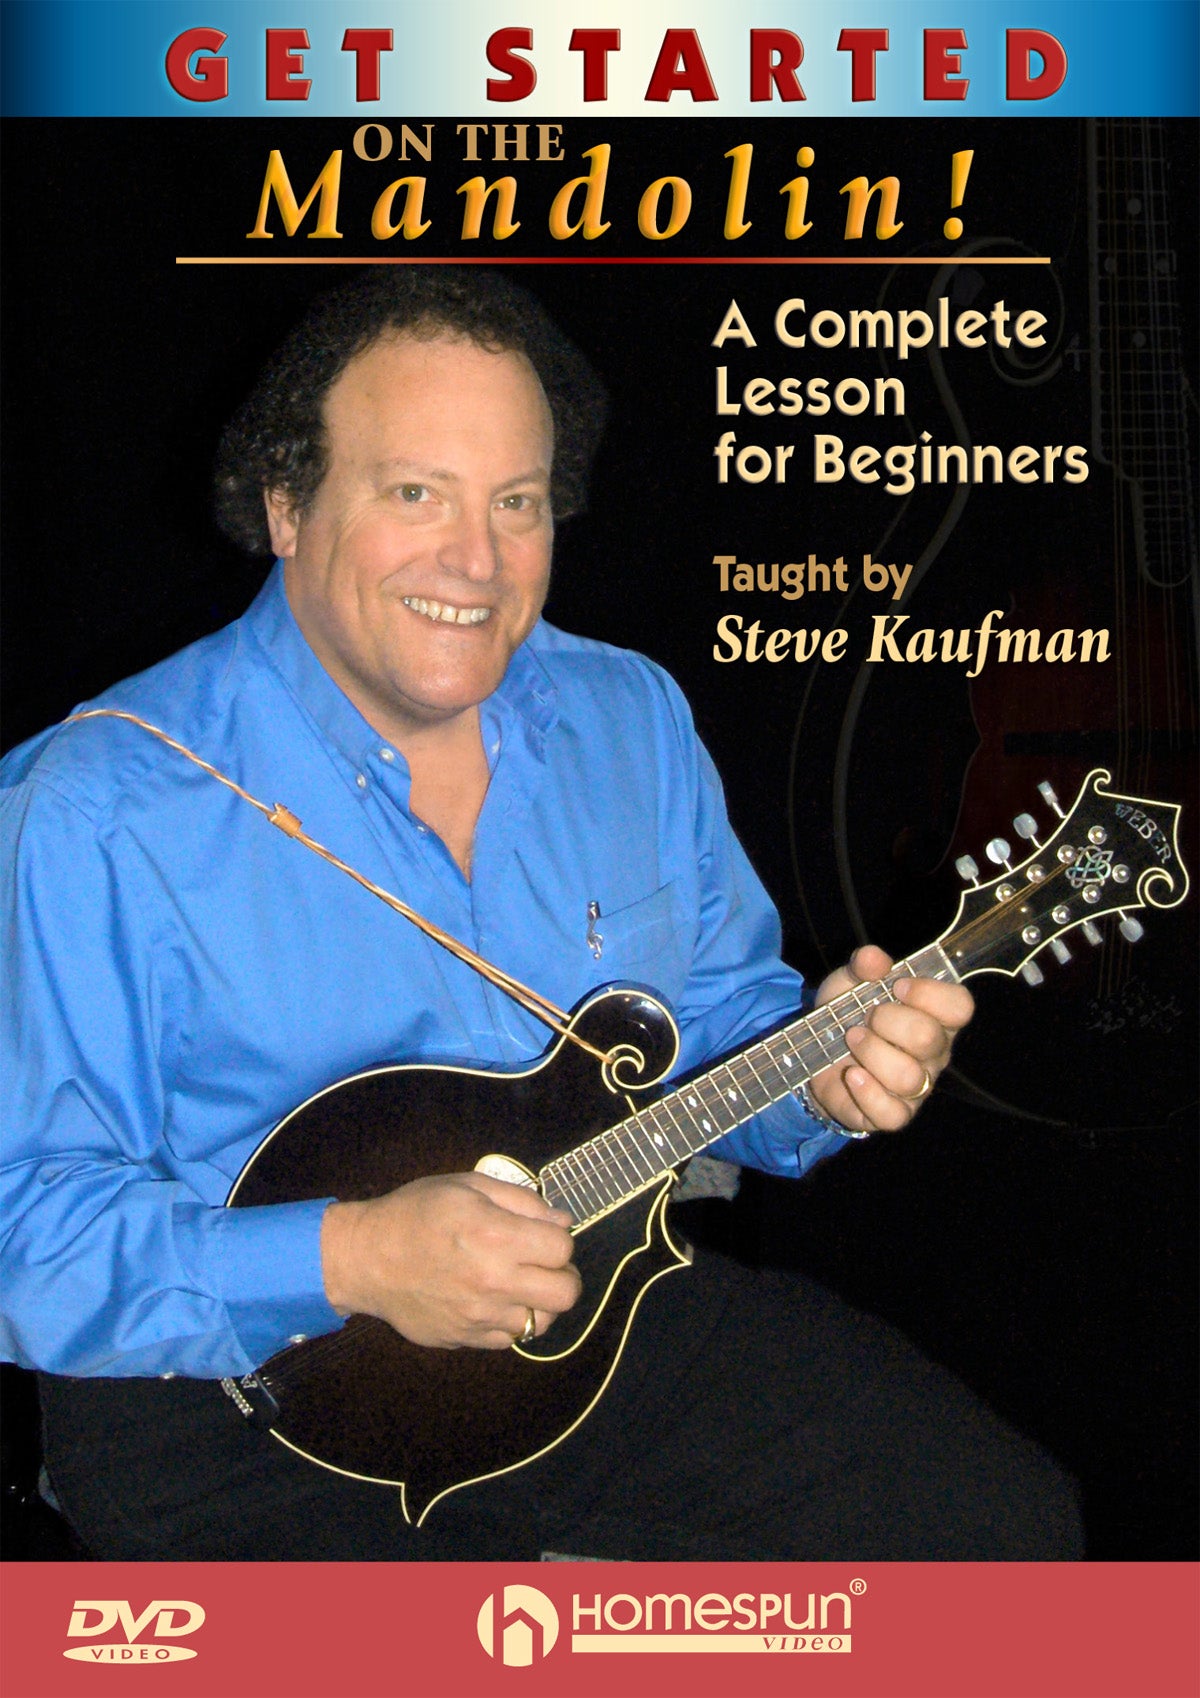 Image 1 of DVD - Get Started On the Mandolin!-A Complete Lesson for Beginners - SKU# 300-DVD403 : Product Type Media : Elderly Instruments